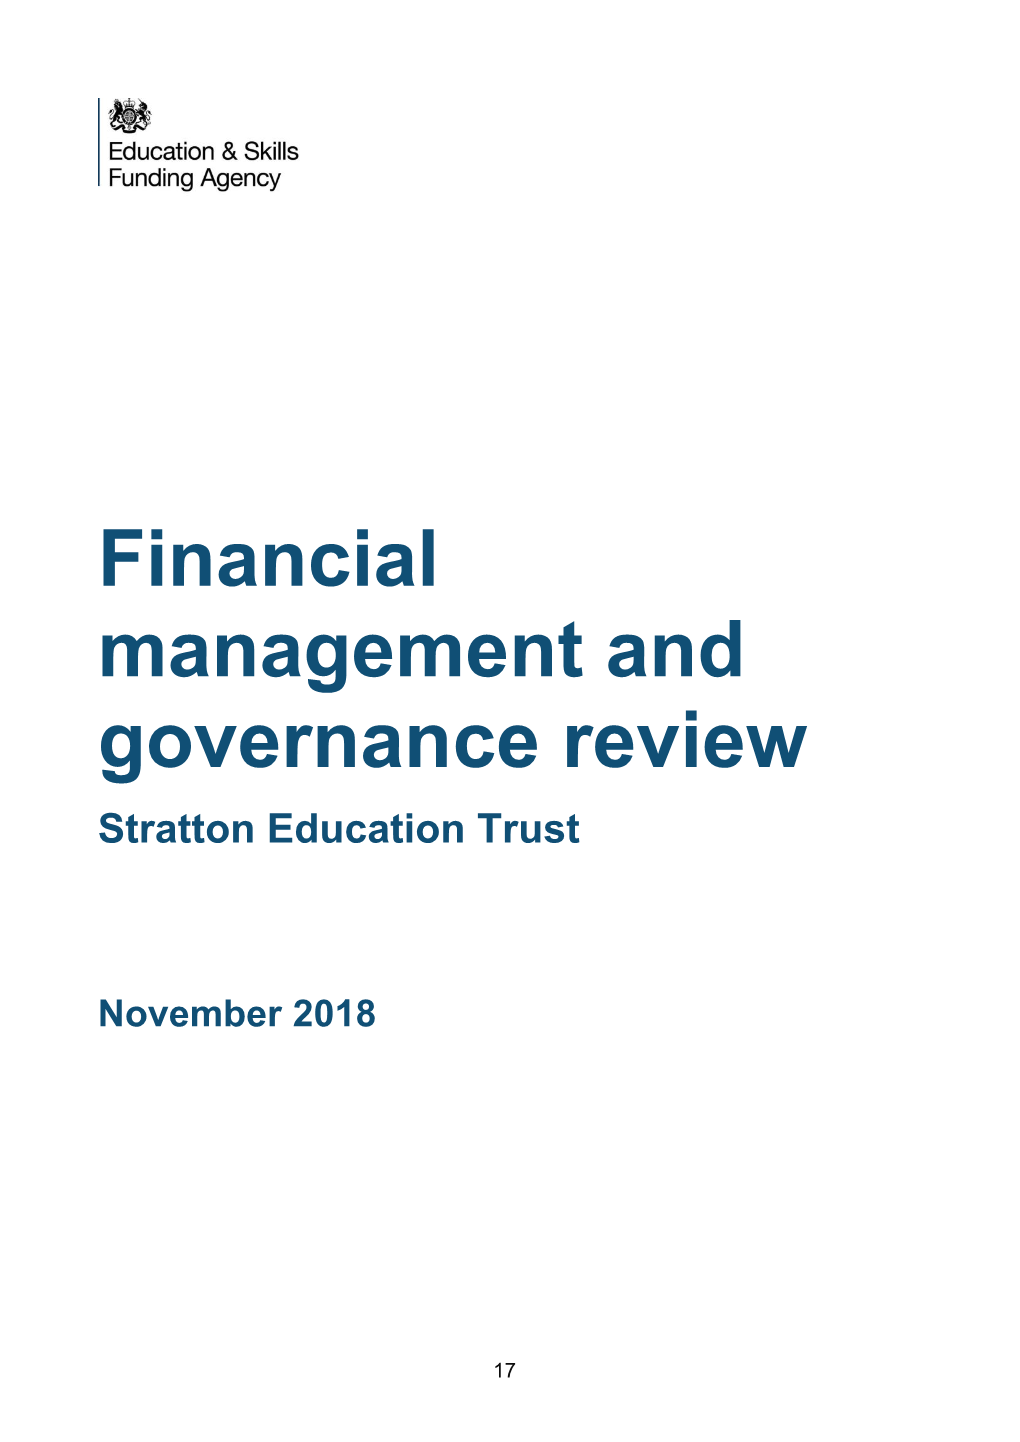 FMG Review Stratton Education Trust